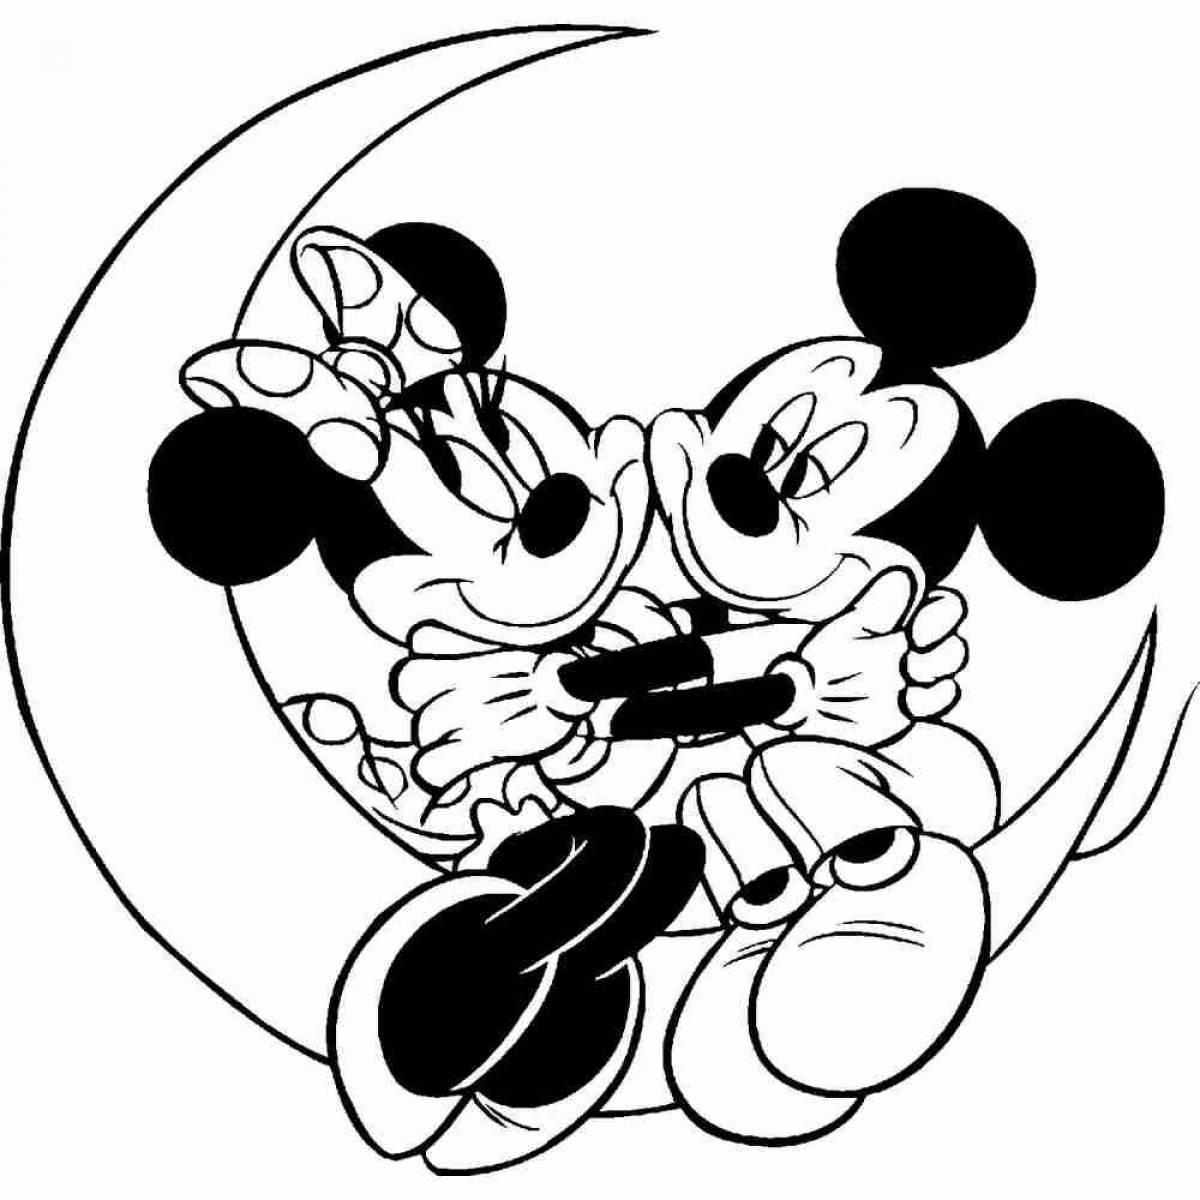 Mickey Mouse bright coloring